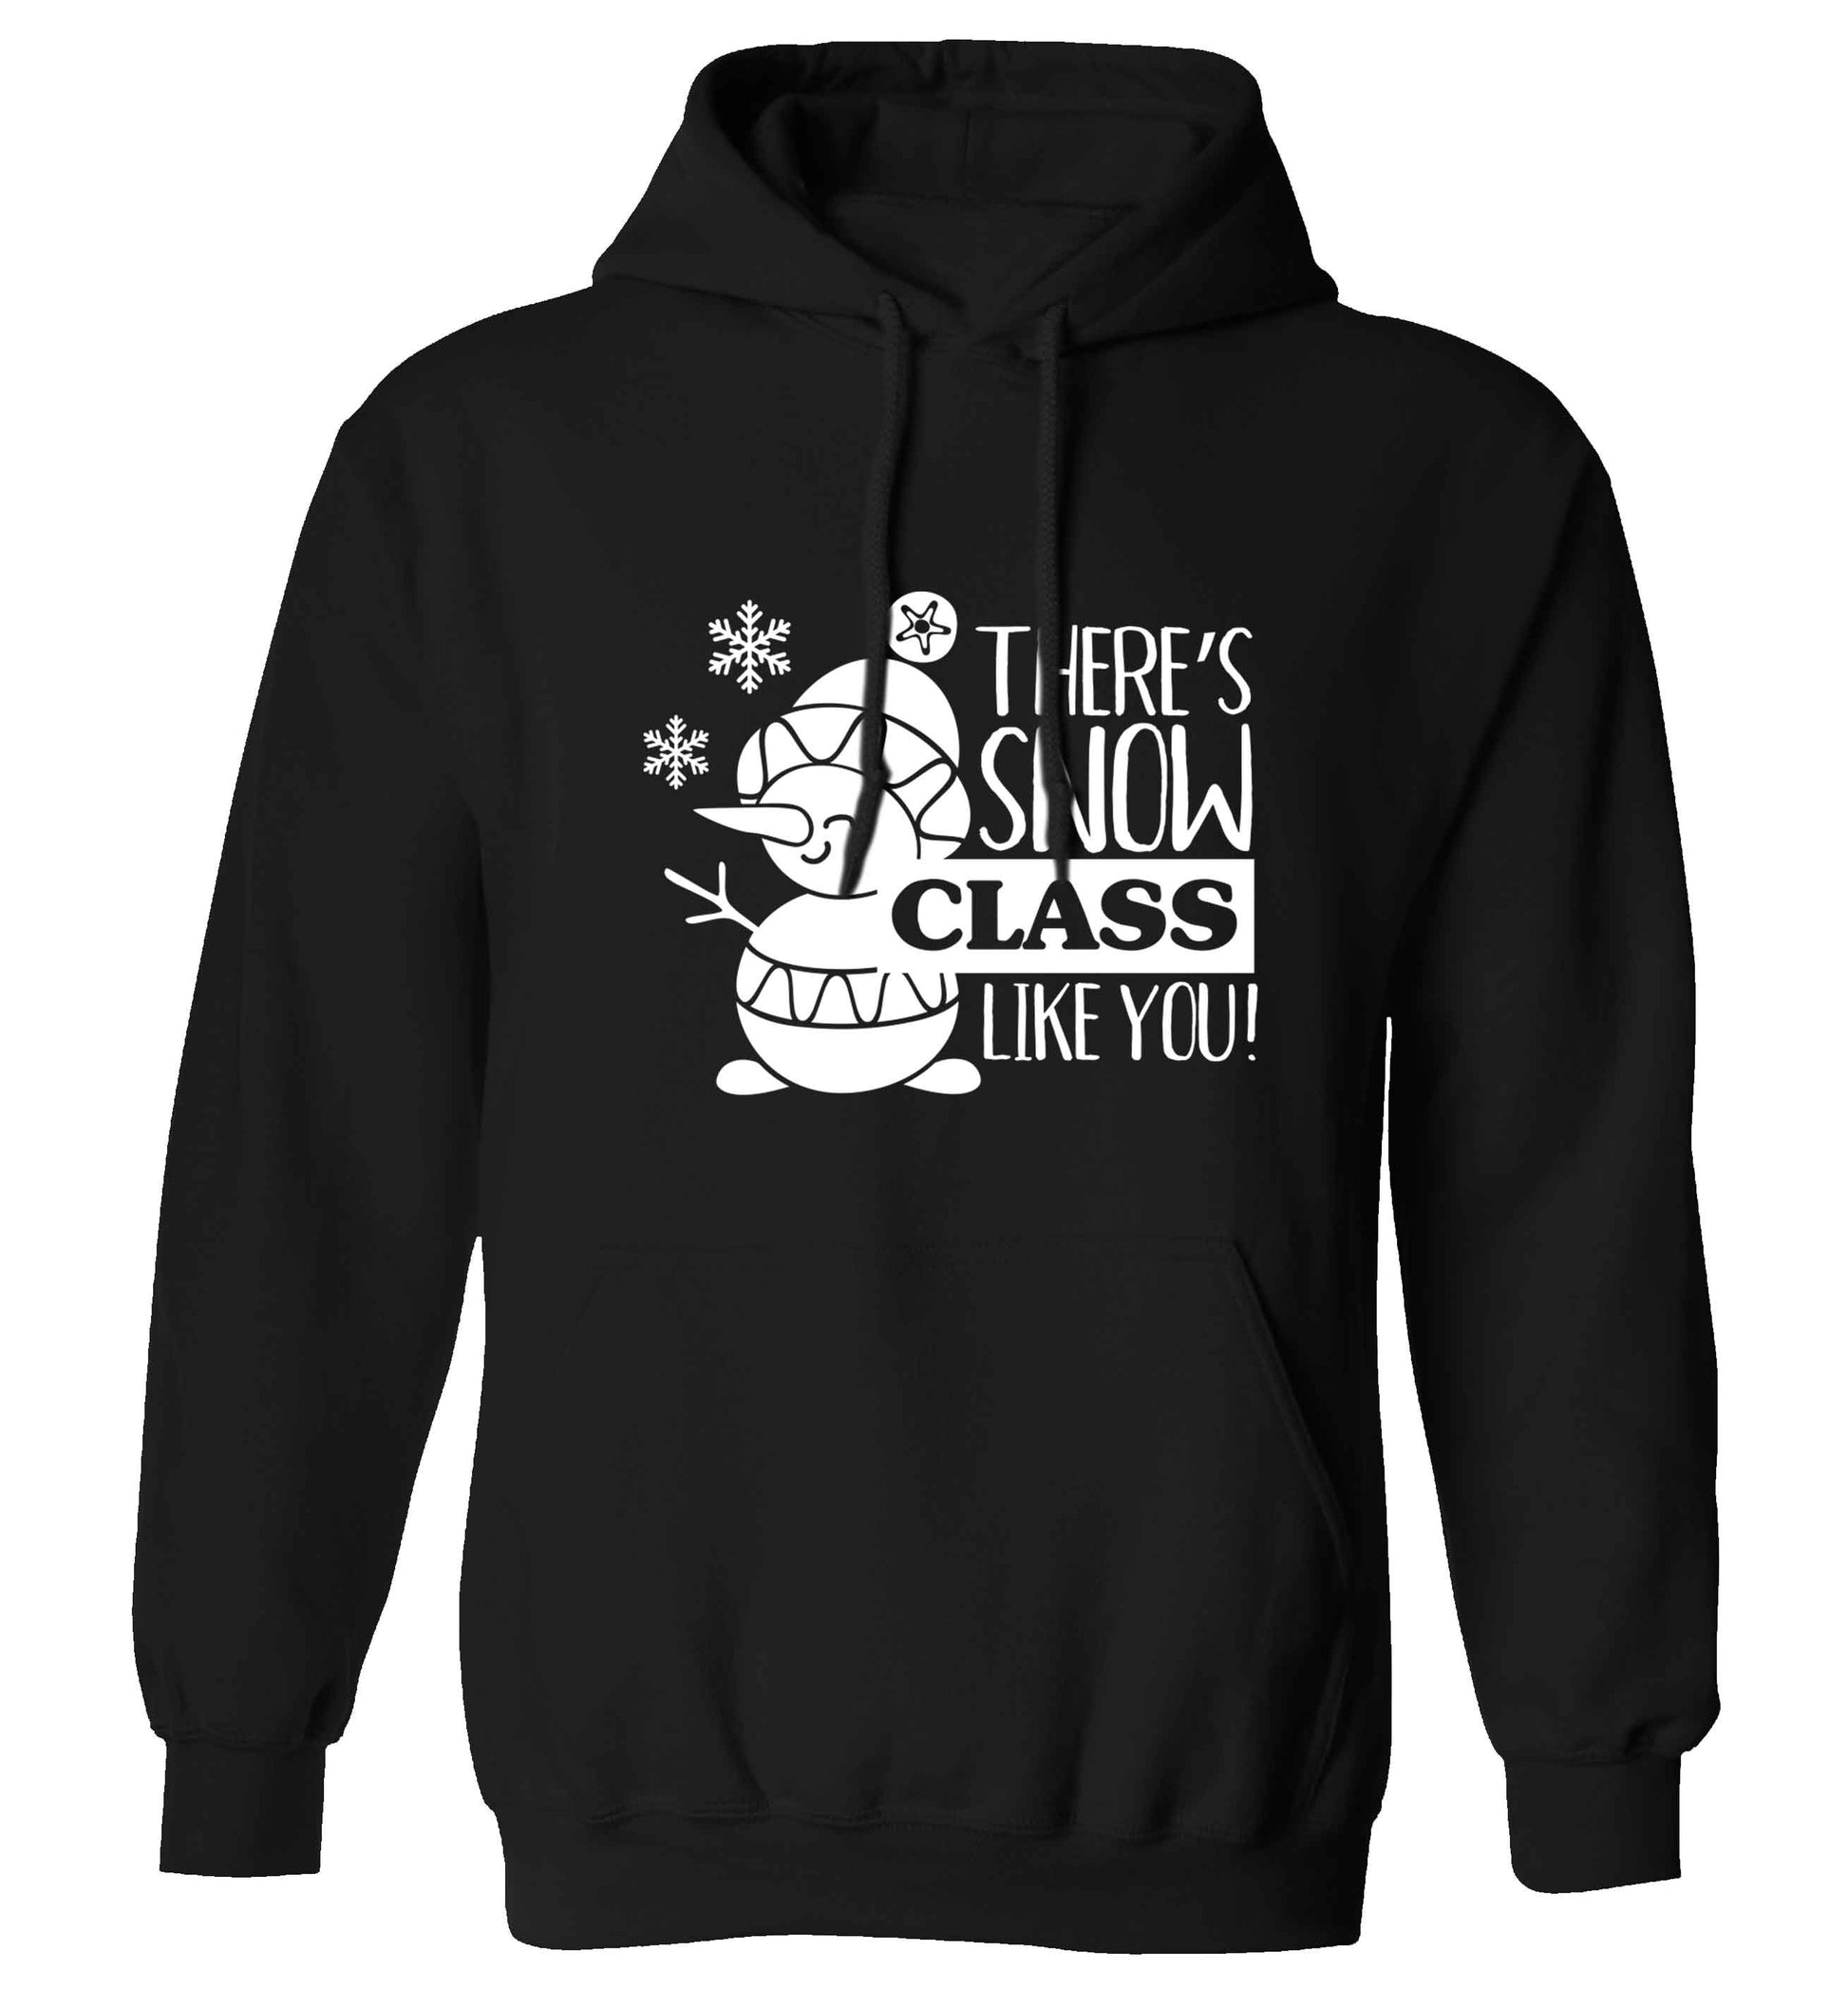 There's snow class like you adults unisex black hoodie 2XL